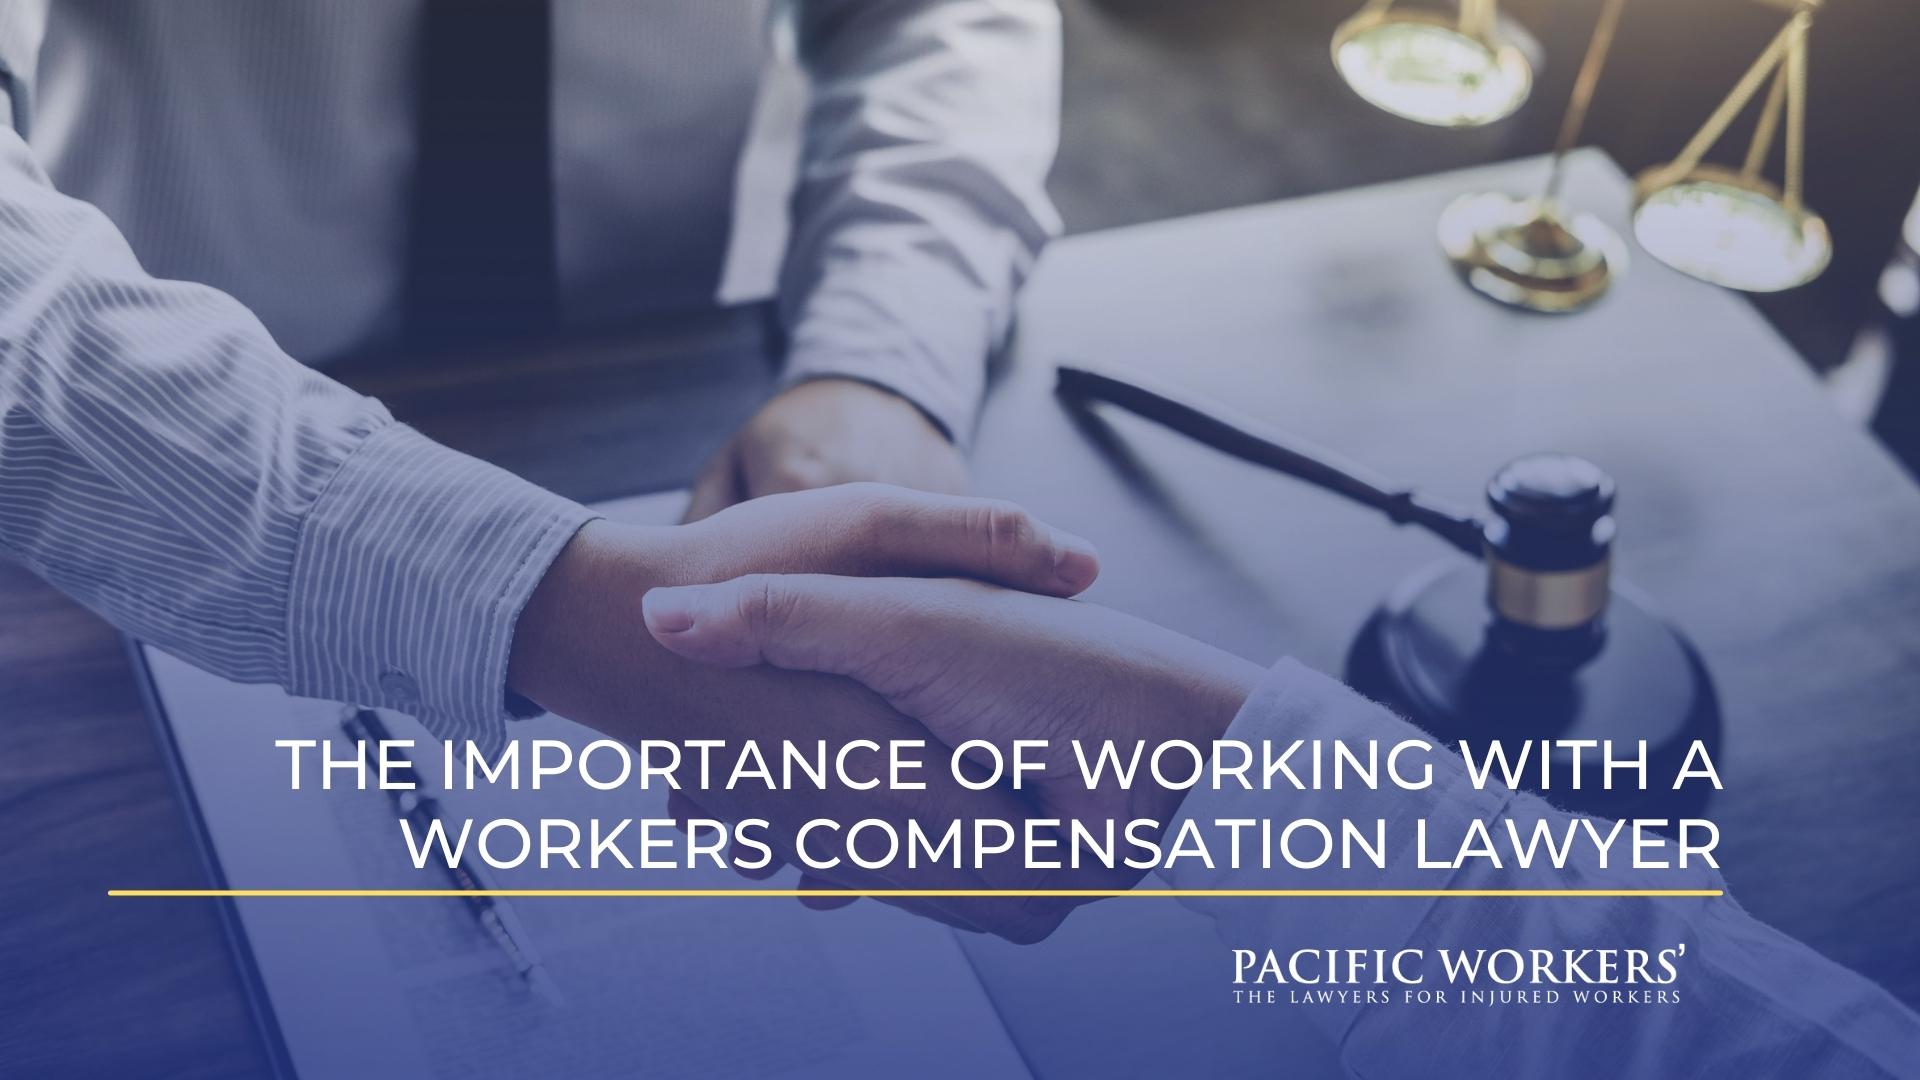 The Importance of Working With a Workers Compensation Lawyer